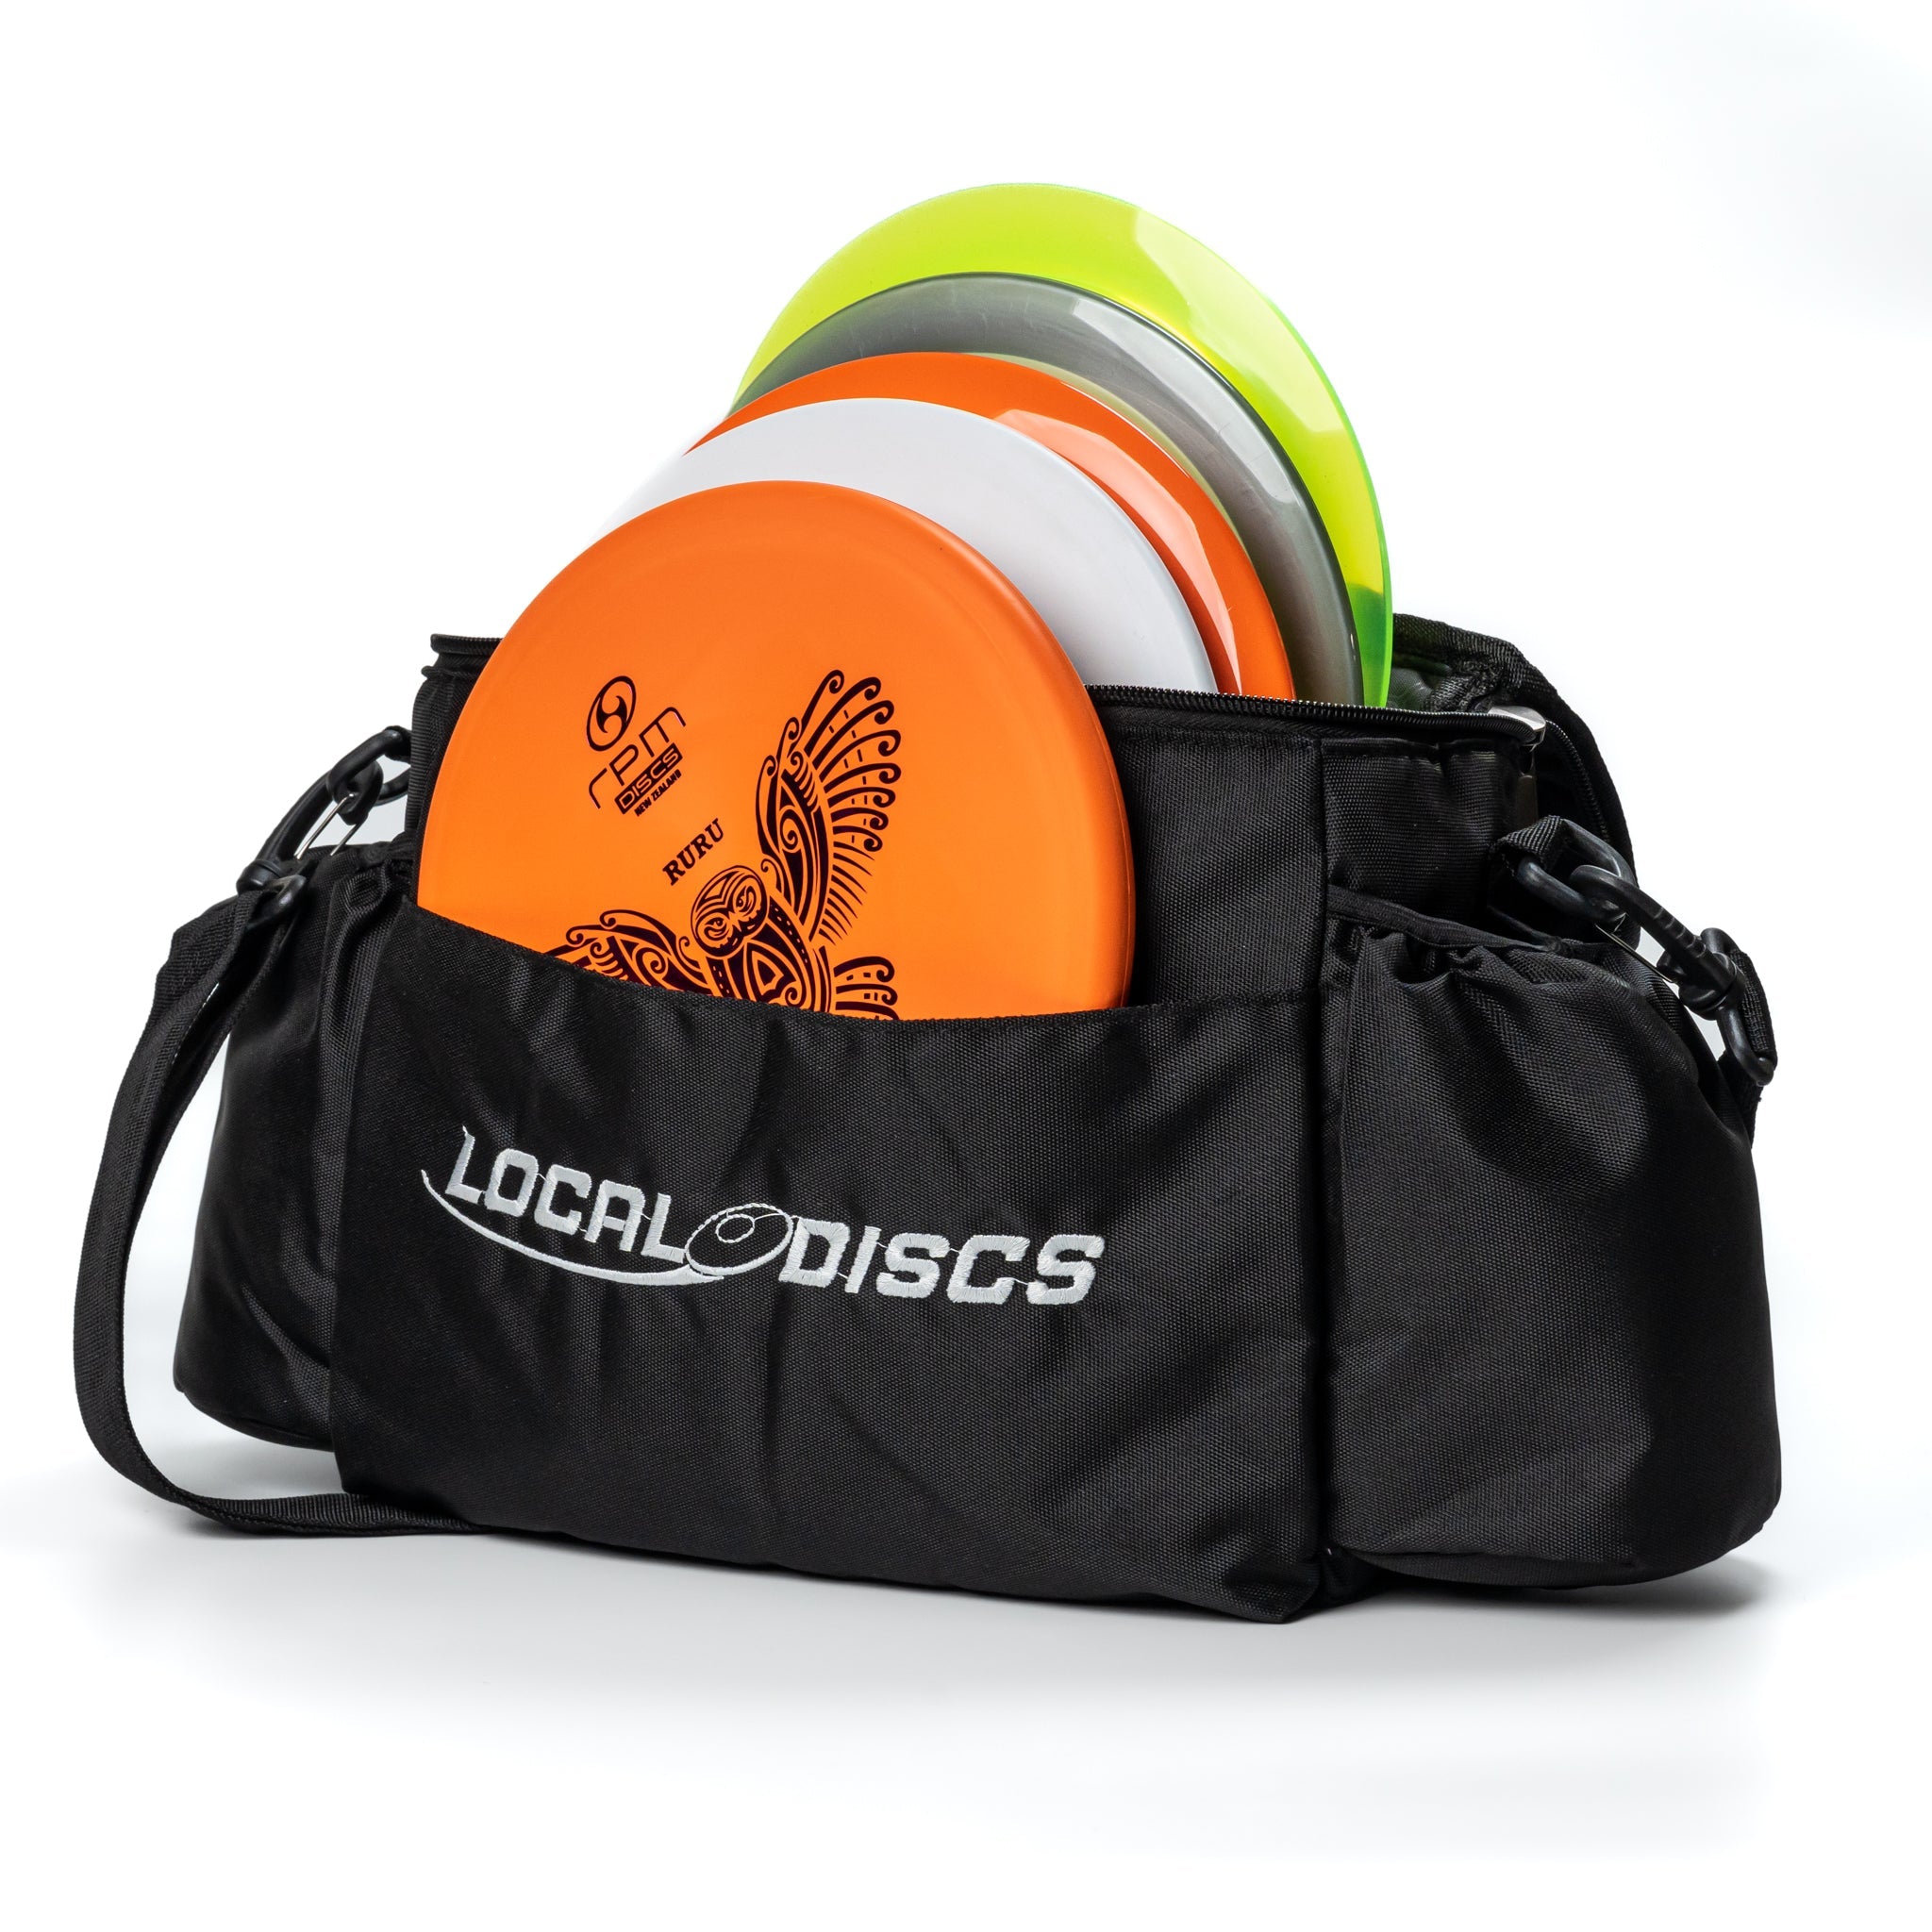 Black Disc Golf Bag filled with discs on white a background